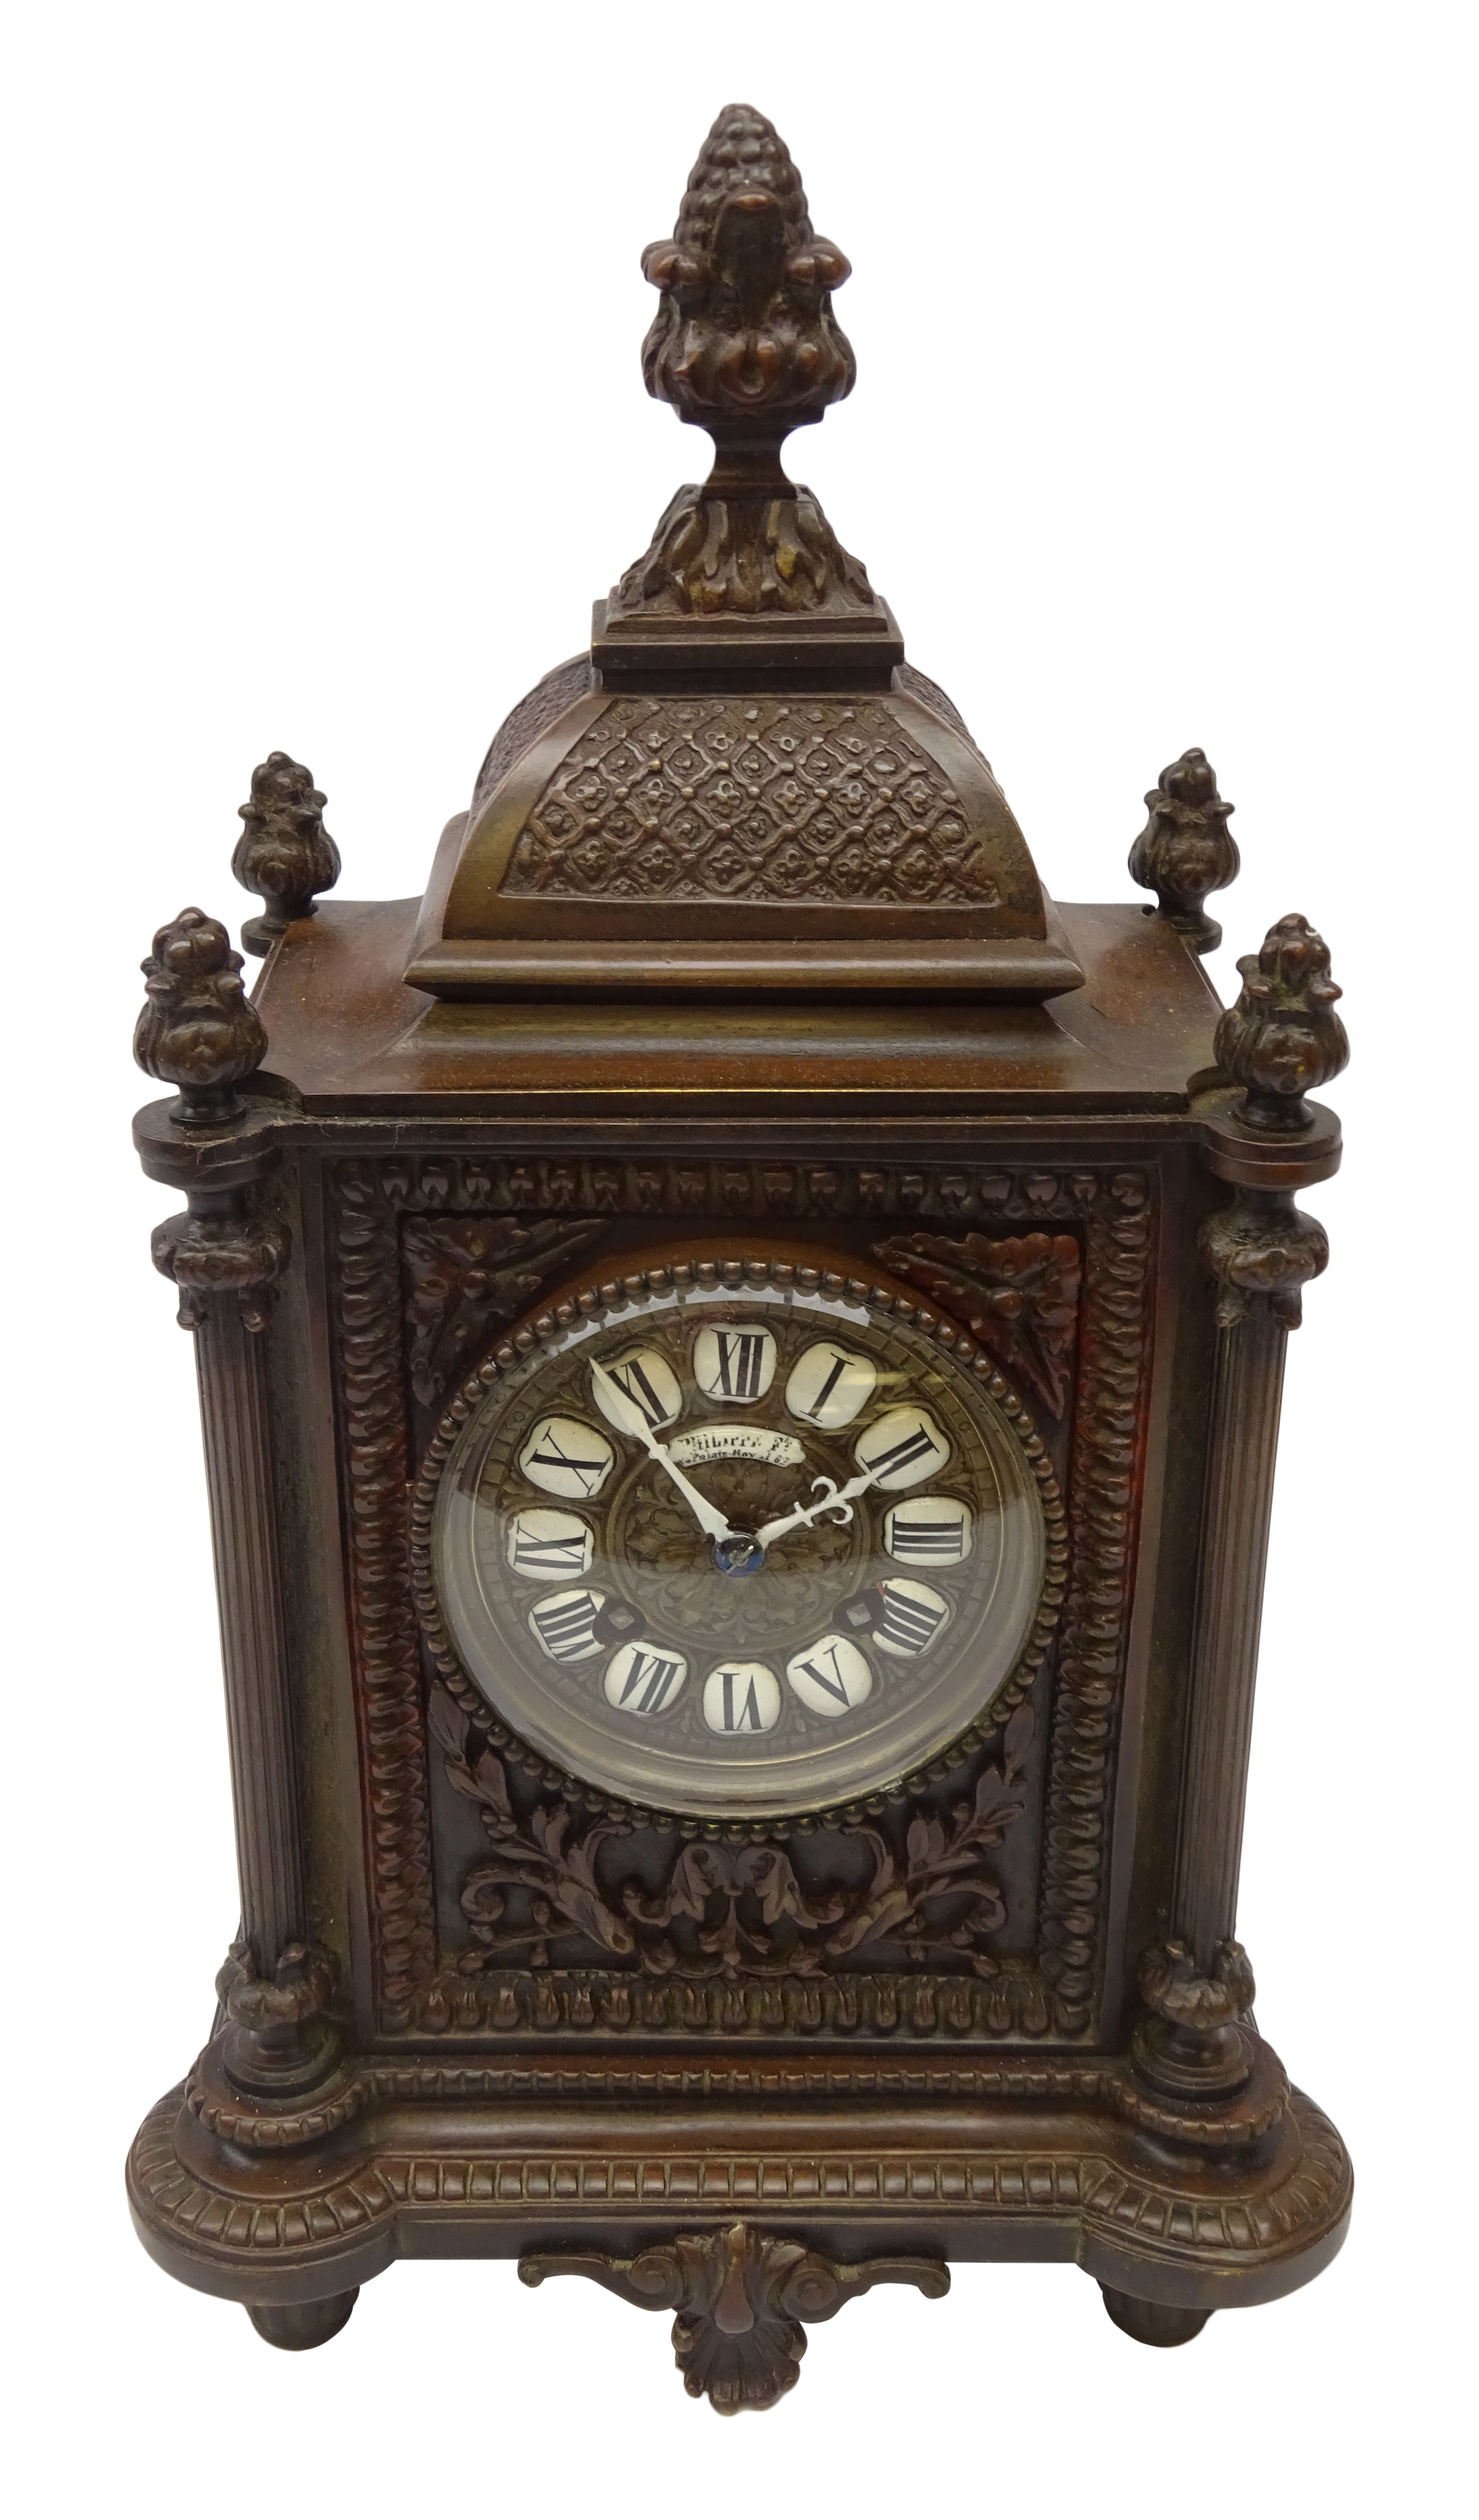 French cast bronze mantel clock, dial with enamel Roman numerals inscribed Phillipe Ft, Palaie-Roy, - Image 2 of 4